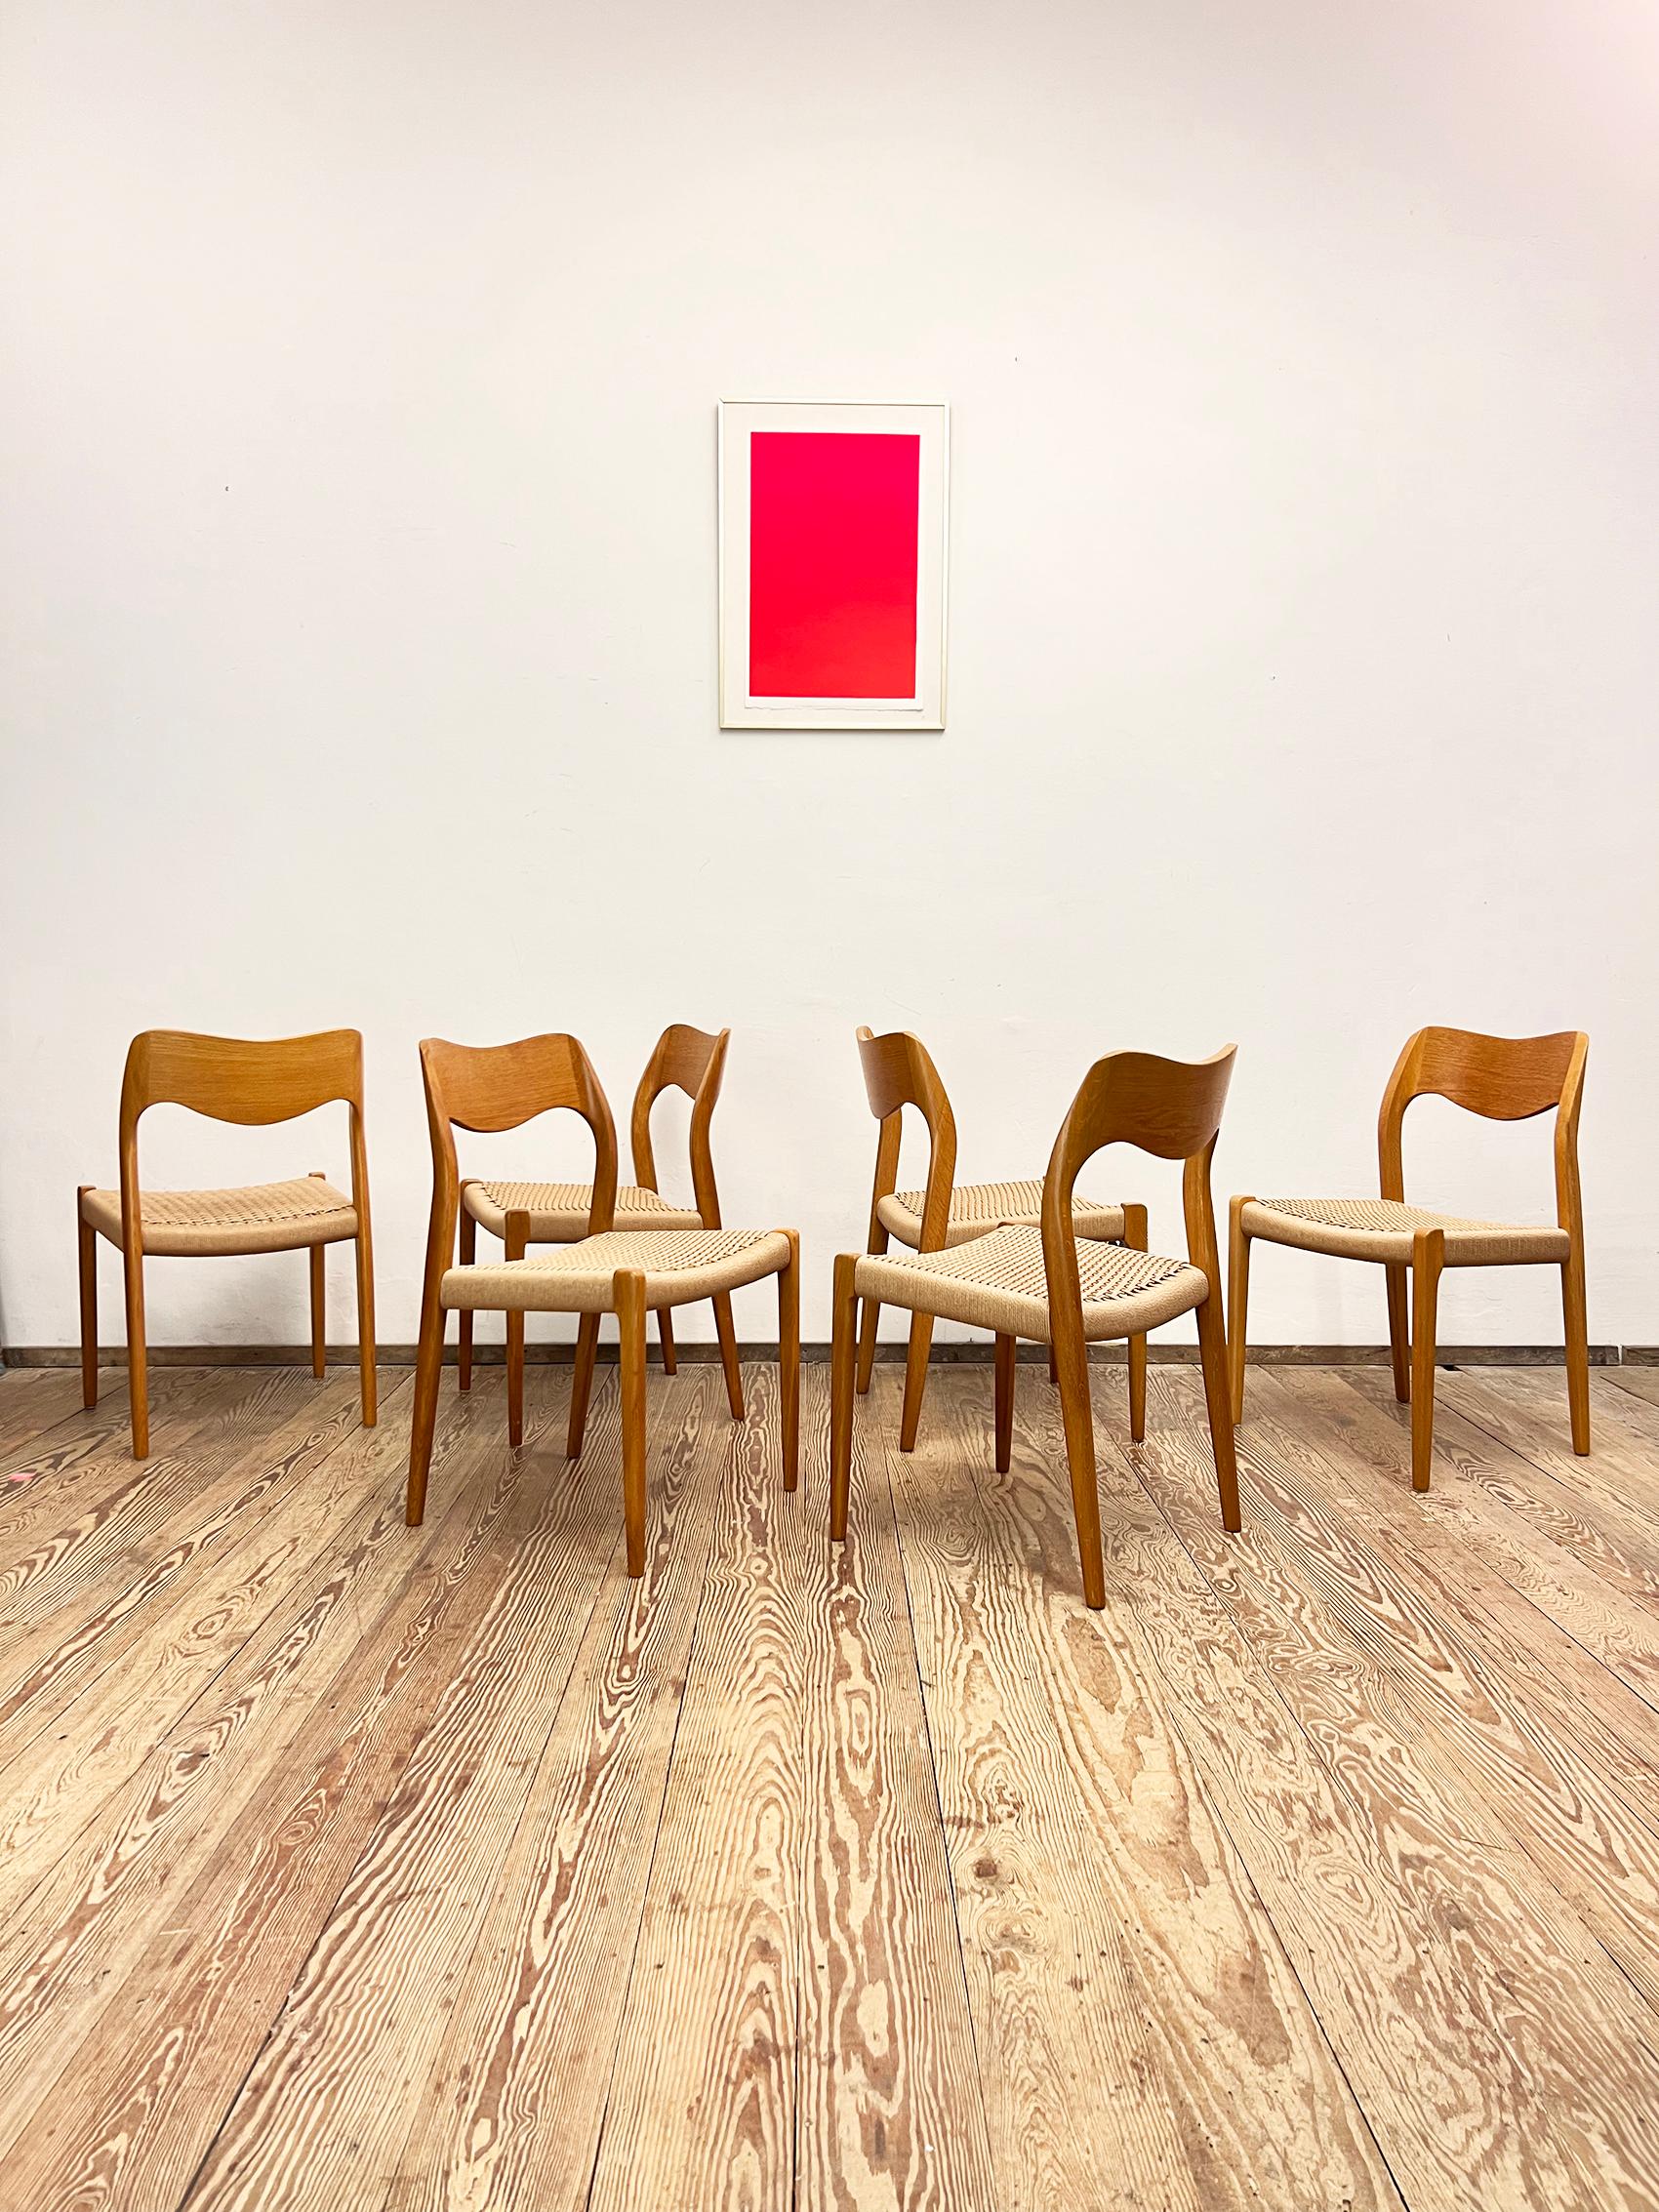 Dimensions 49 x 49 x 79 x 44cm (Width x Depth x Height x Seat height)

Danish Design by Niels O. Møller manufactured by J. l. Møller in Denmark. The set features 6 dining chairs made out of oak wood, partially veneer and paper cord seats. The side